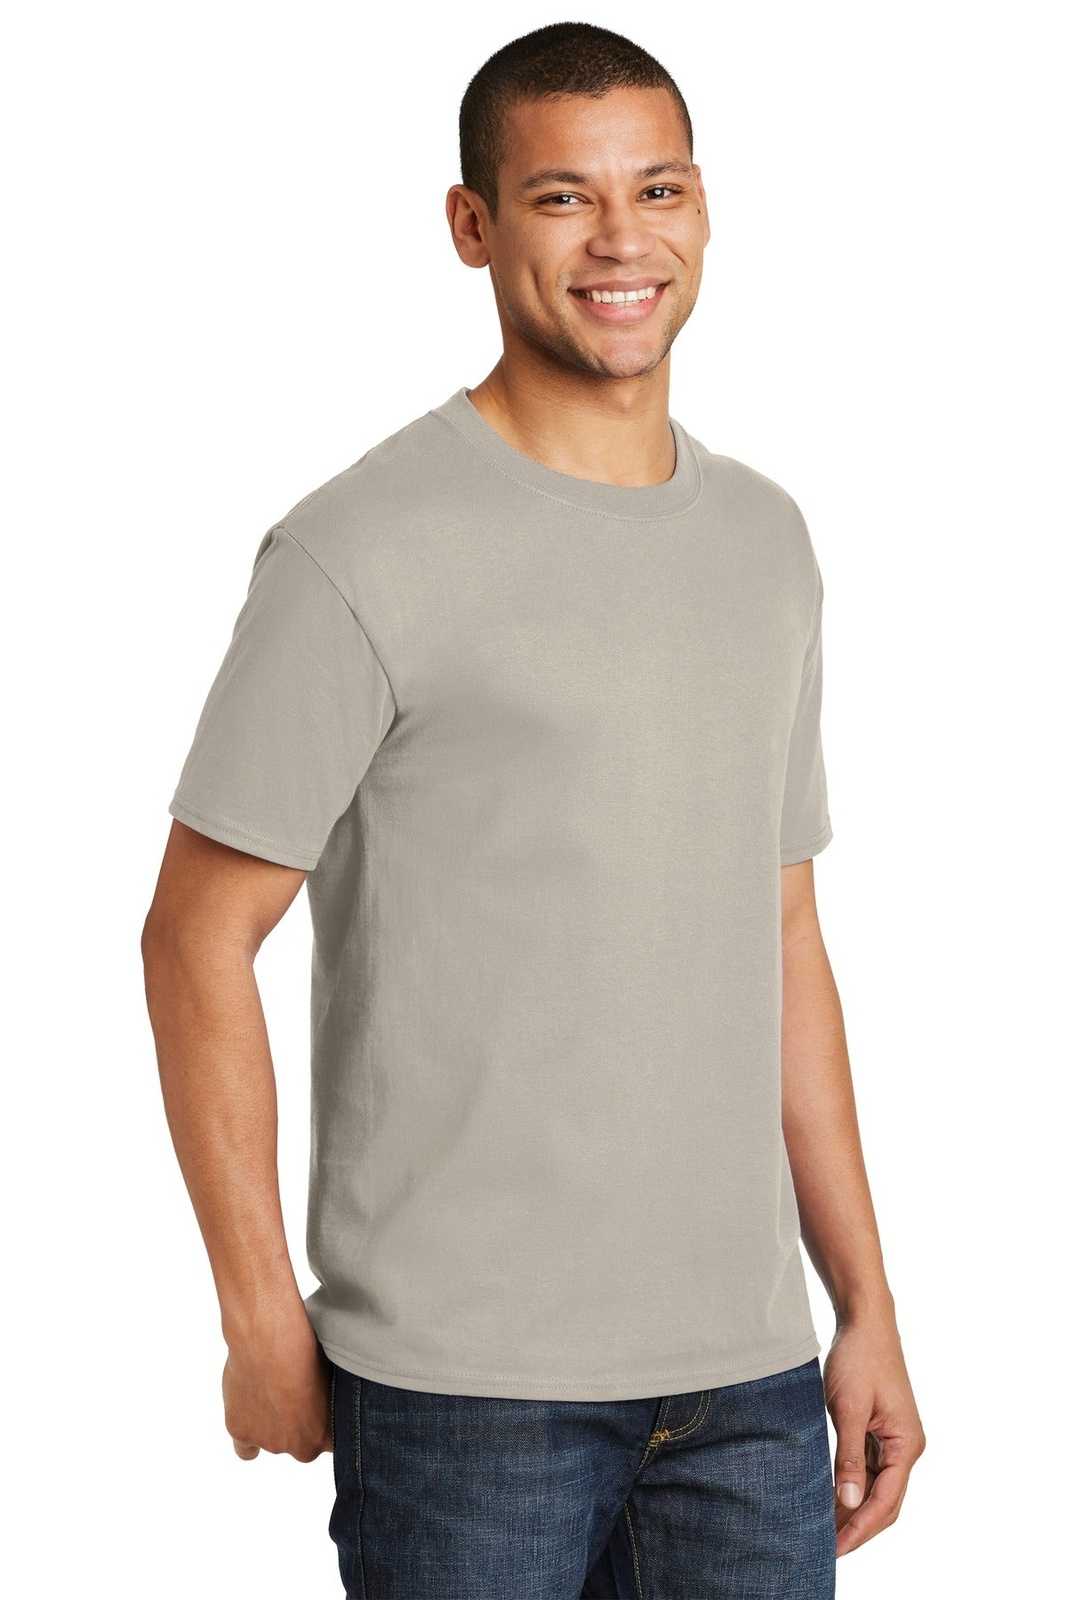 Hanes 5180 Beefy-T 100% Cotton T-Shirt - Sand - HIT a Double